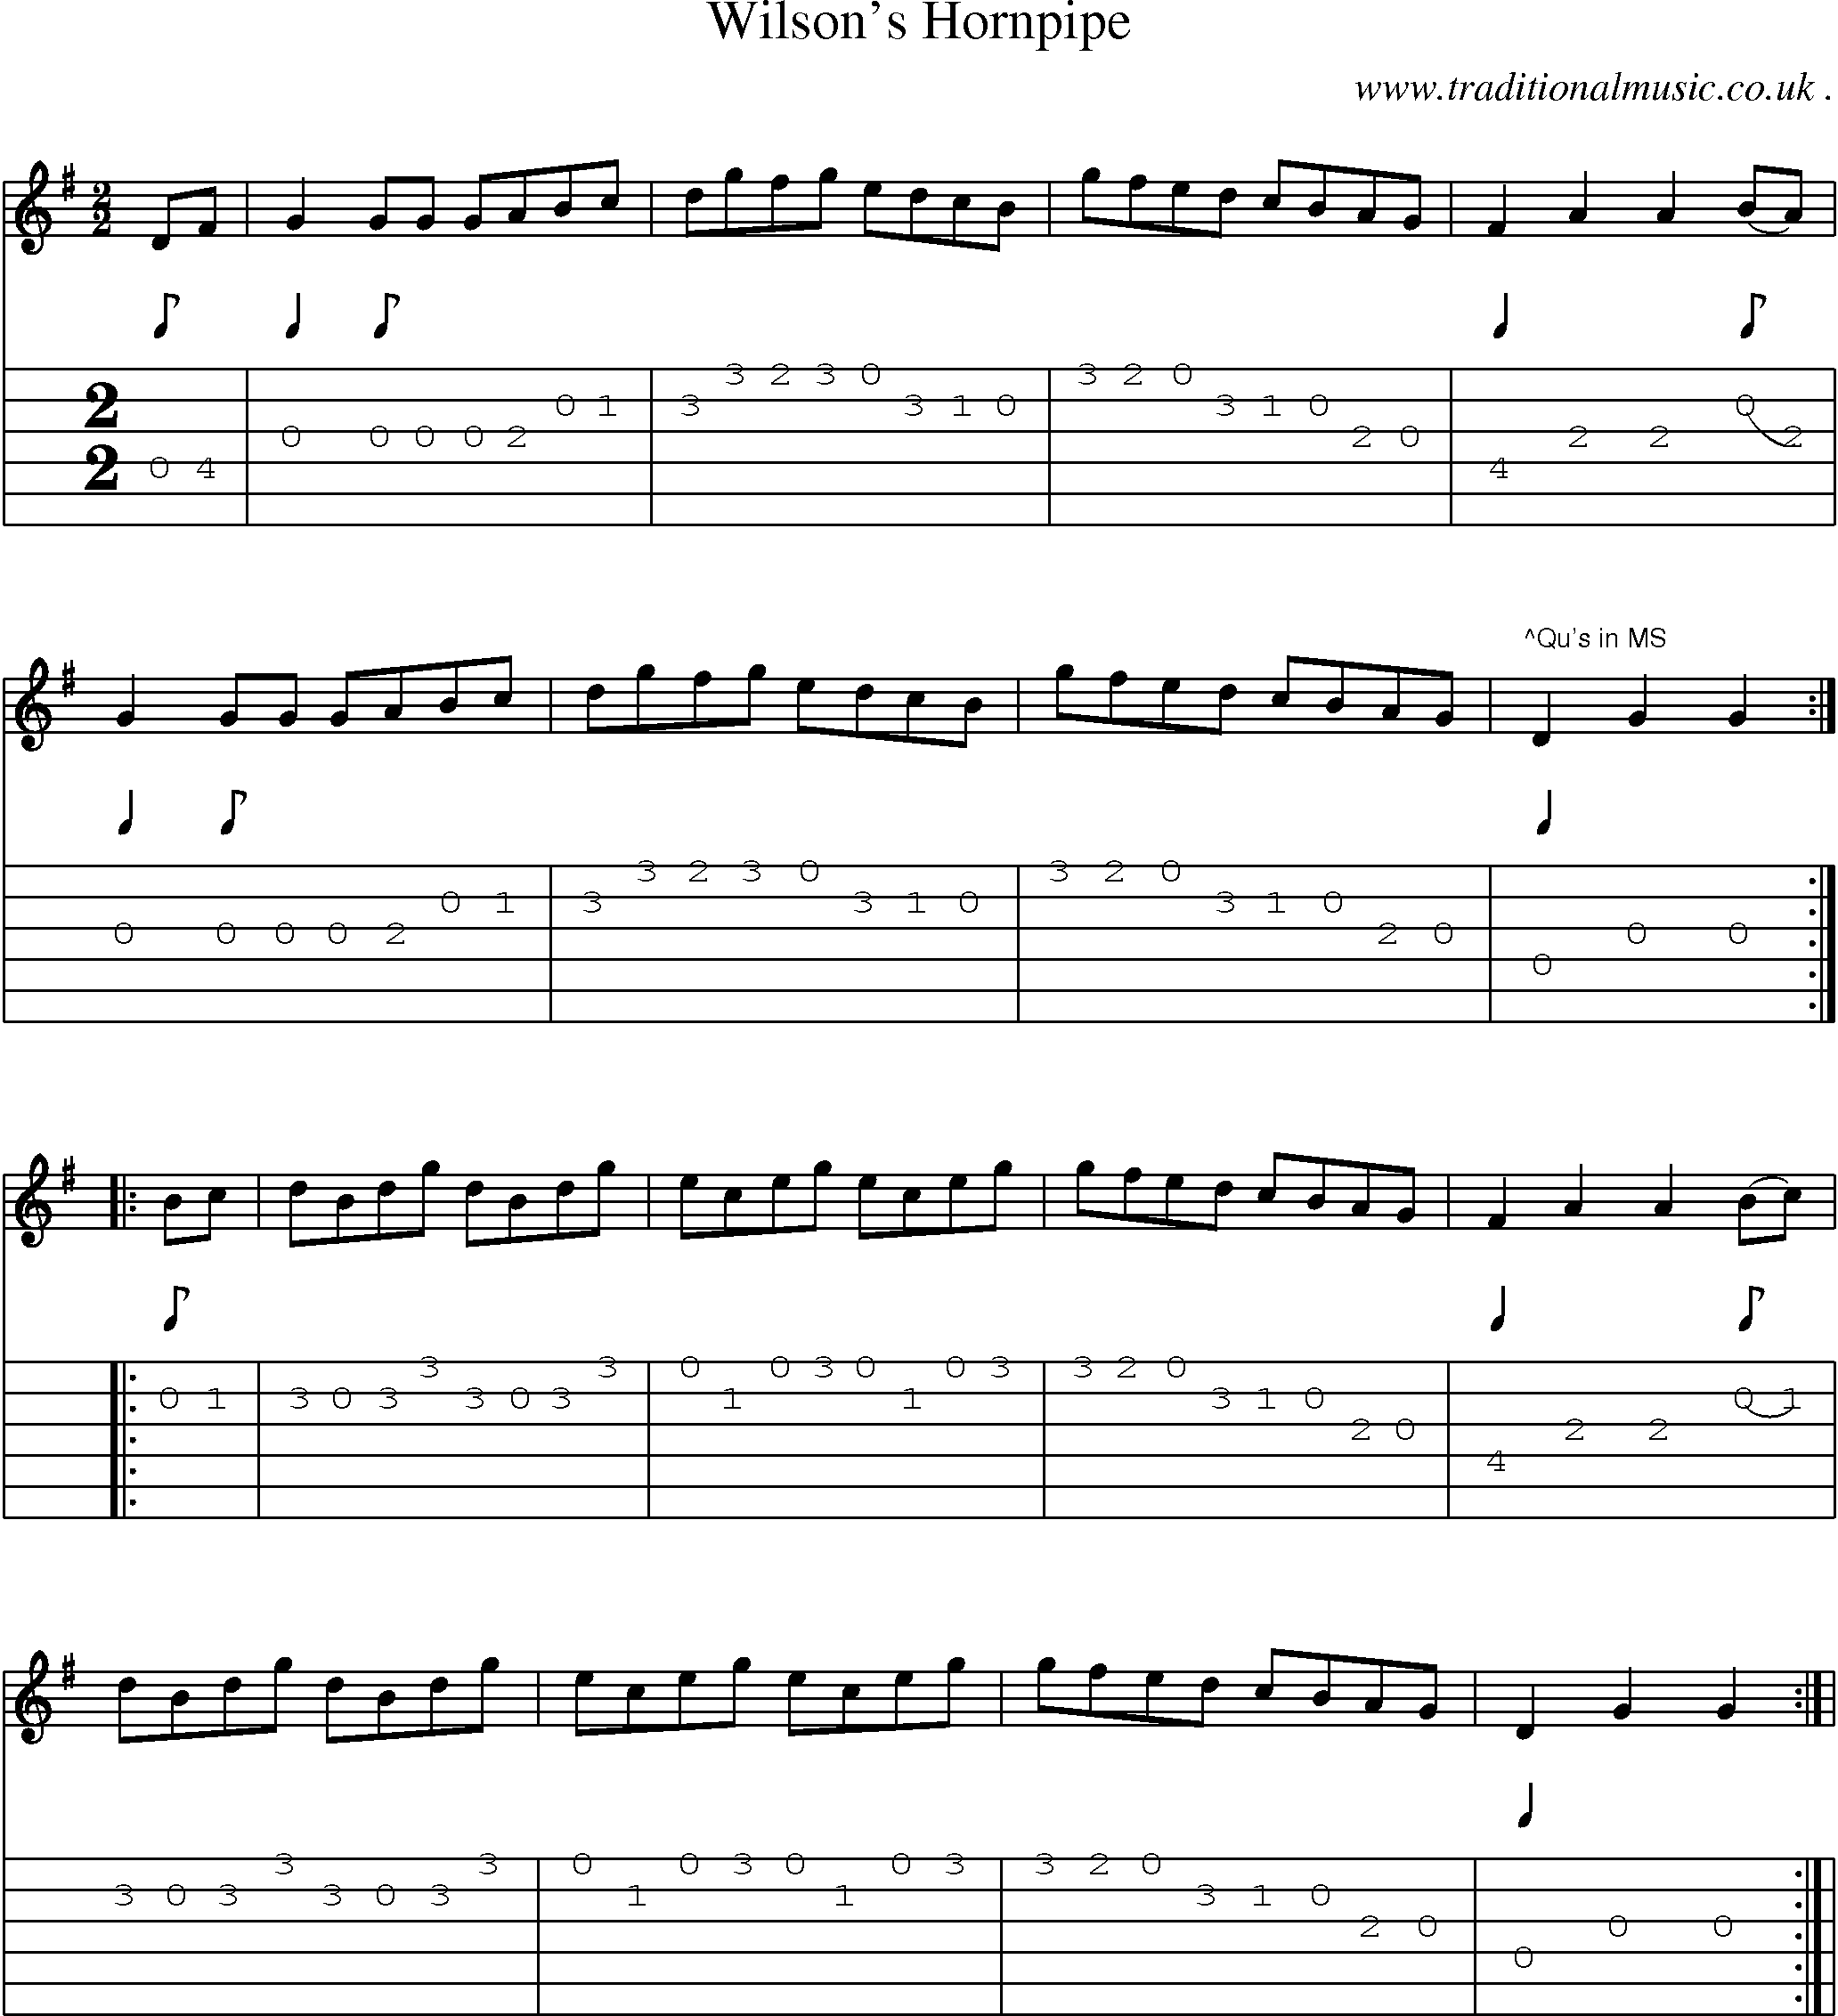 Sheet-Music and Guitar Tabs for Wilsons Hornpipe